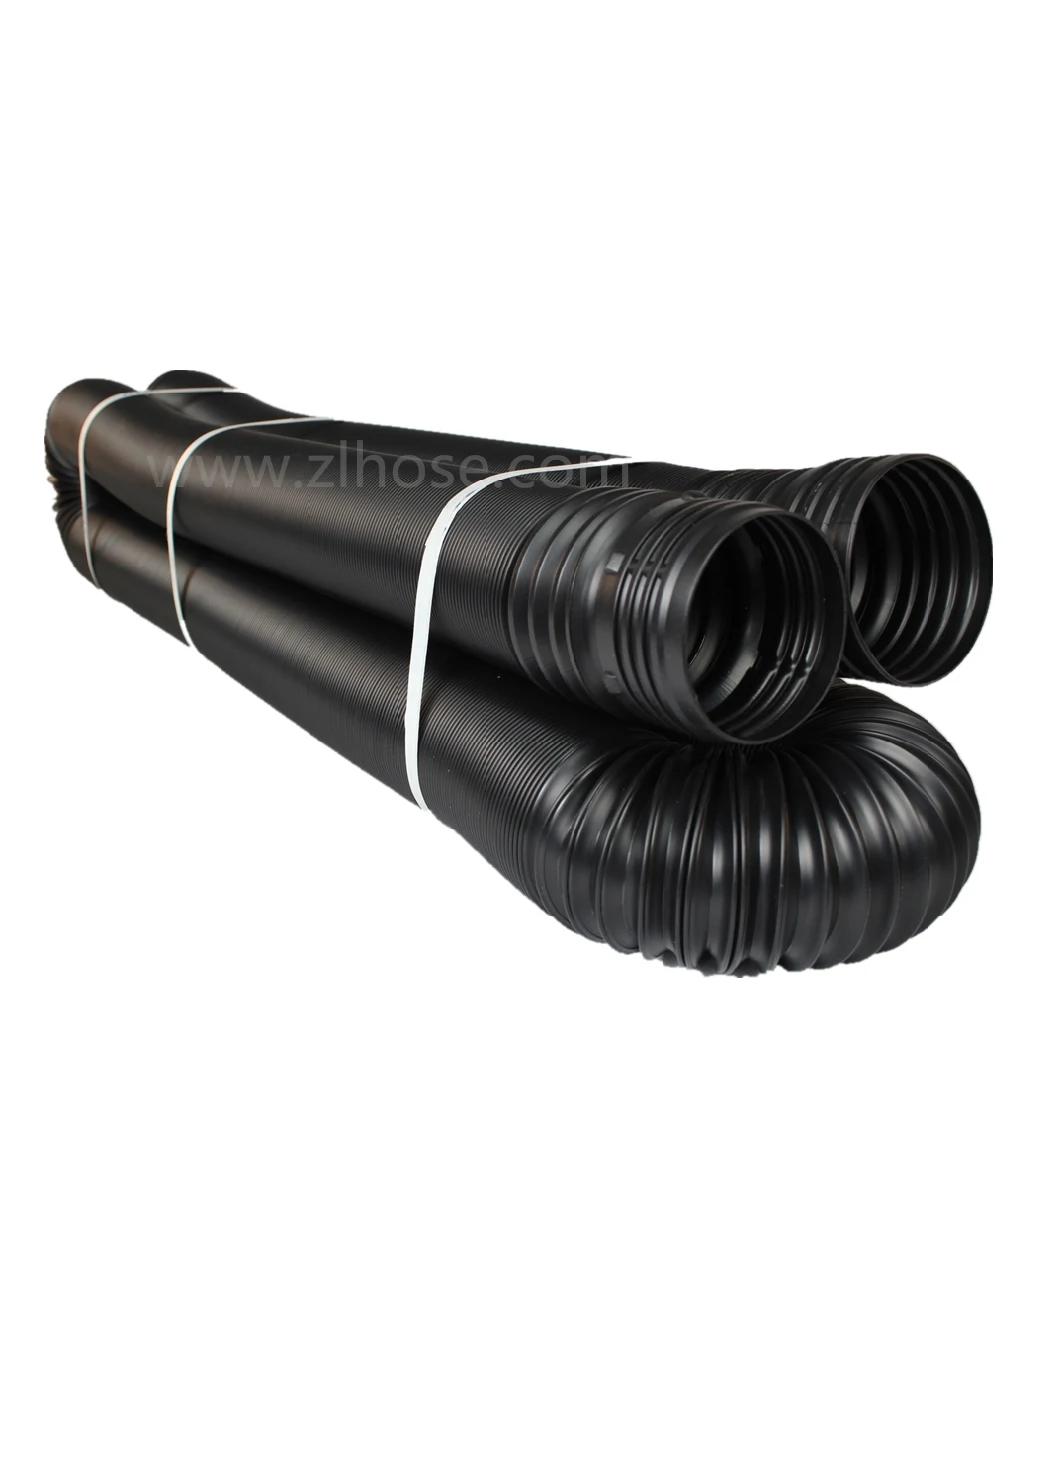 Flexible Non-Perforated Water Pipe 100mm (4") X 35′